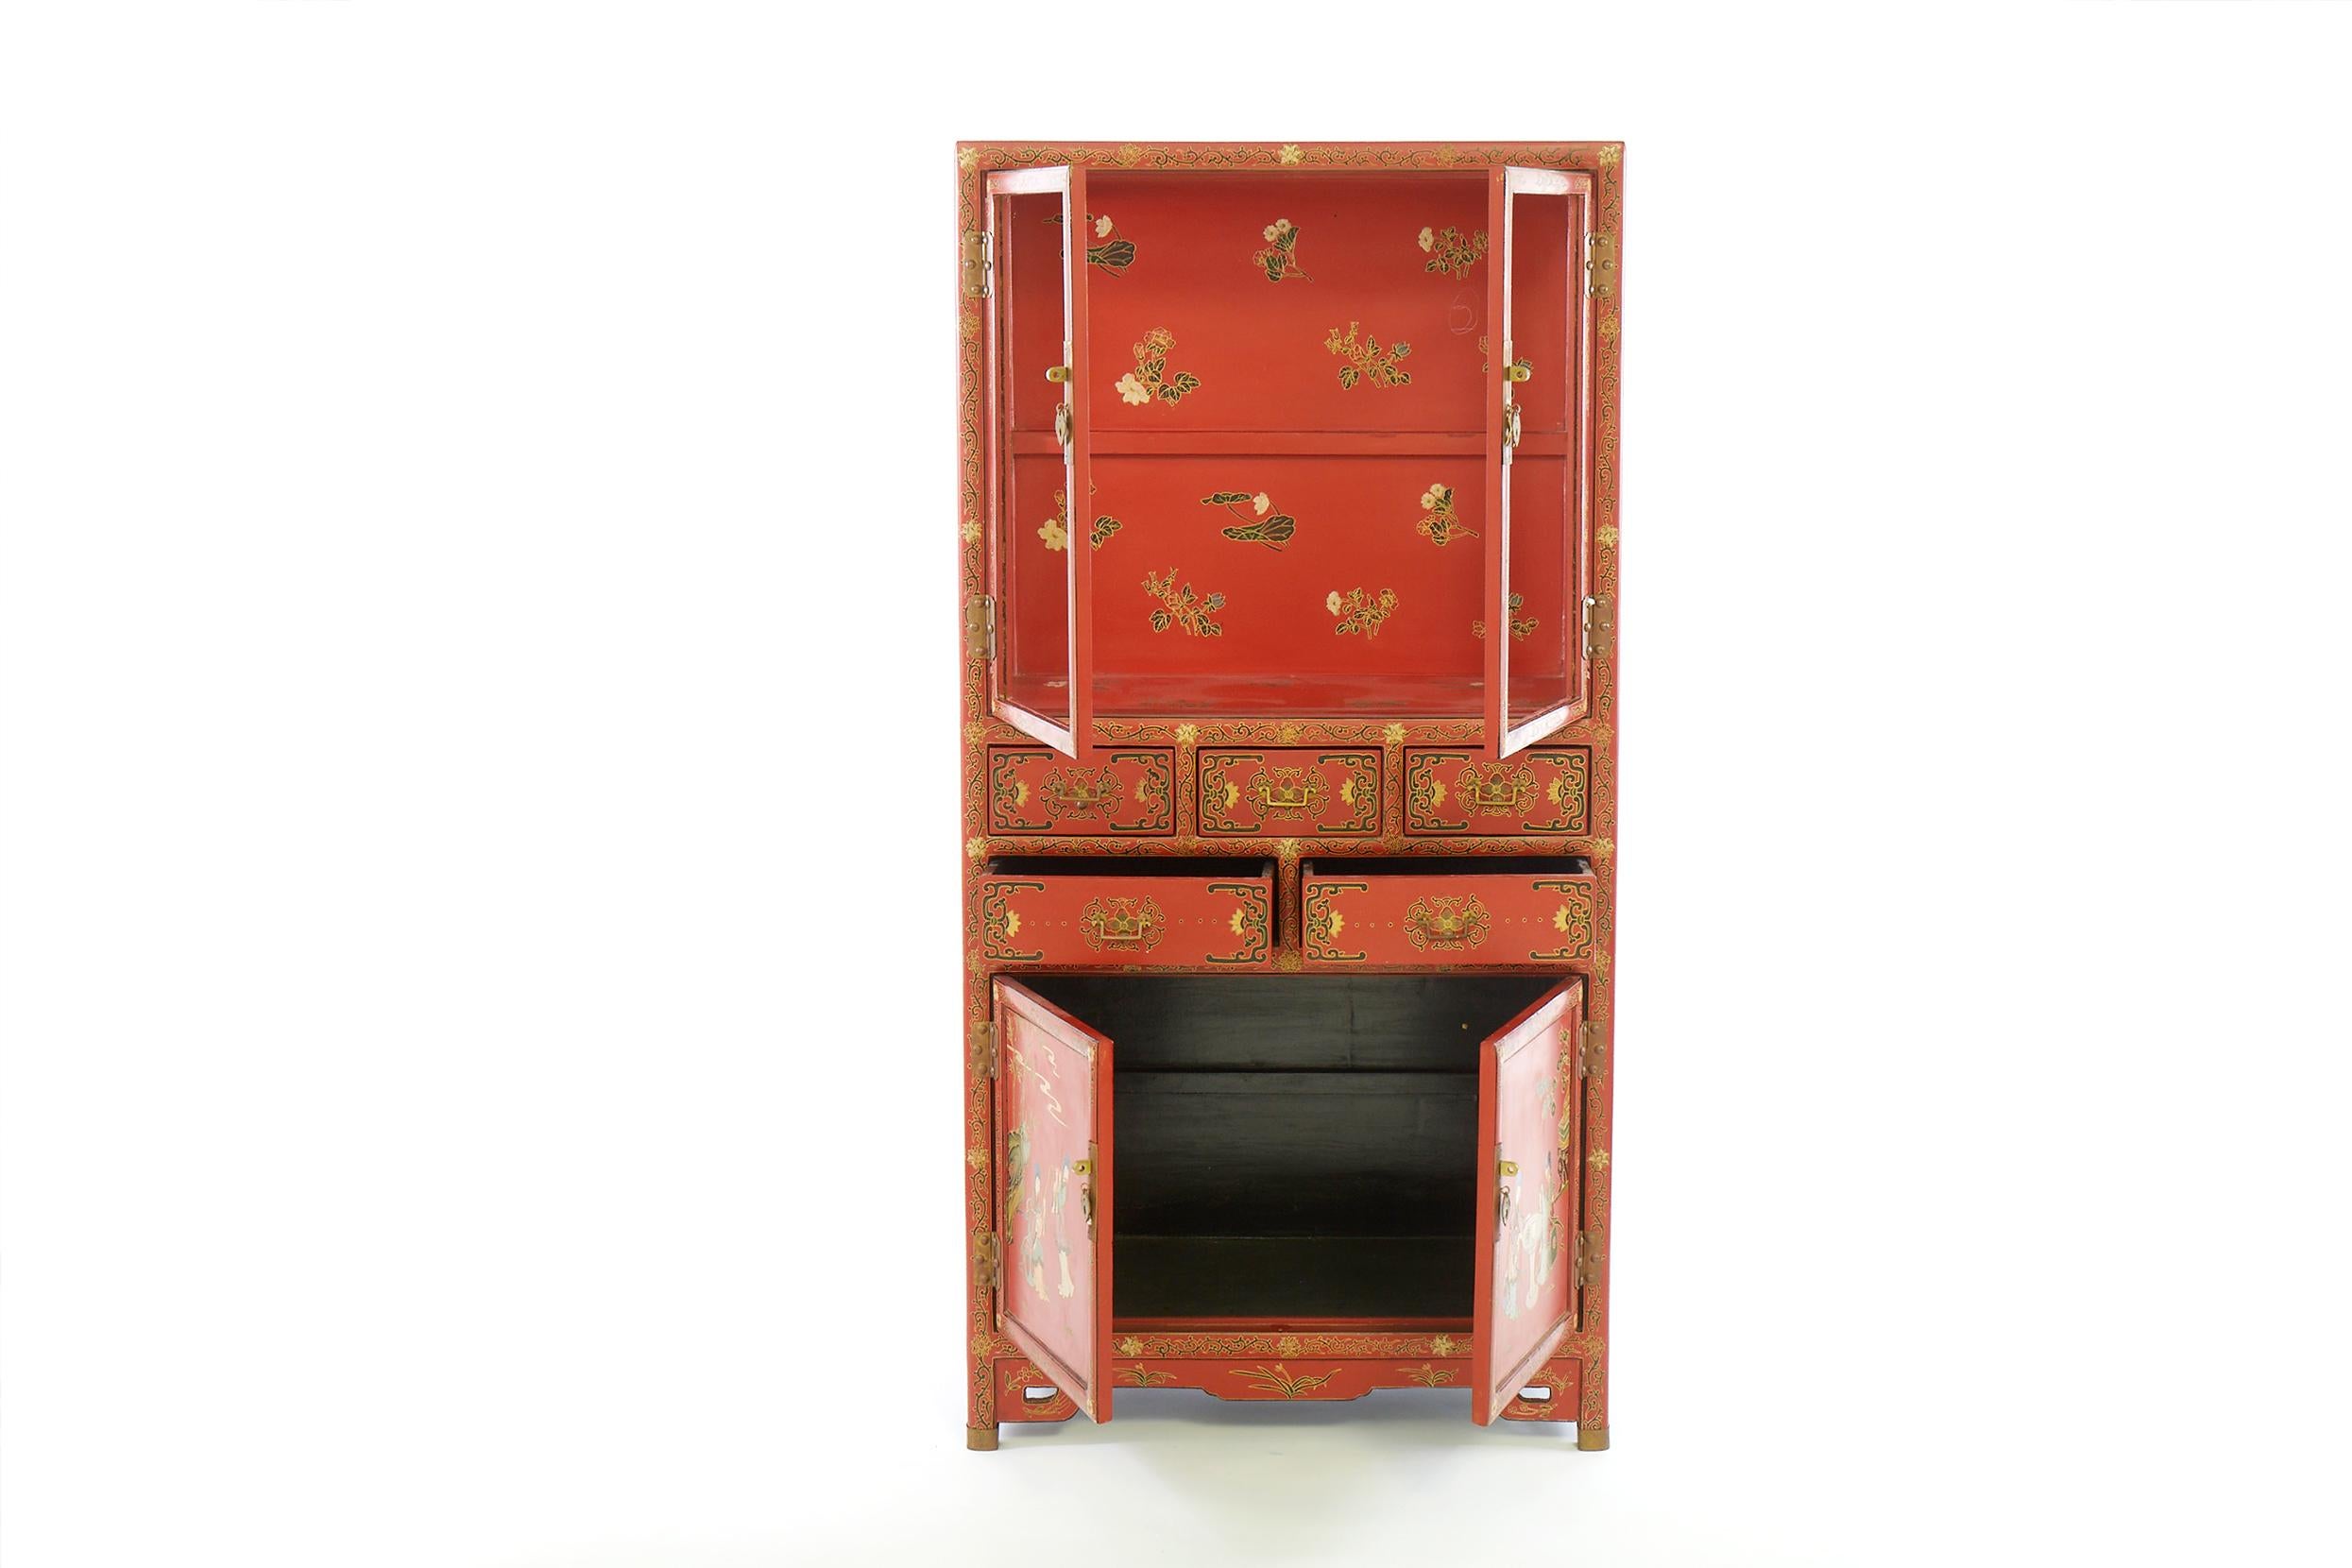 Mid 20th century hand painted chinoiserie style chinese lacquered cabinet / vitrine. The cabinet features two upper glazed drawers, five middle drawers with two lower doors and brass hardware. The cabinet comes with one glass shelve for the upper